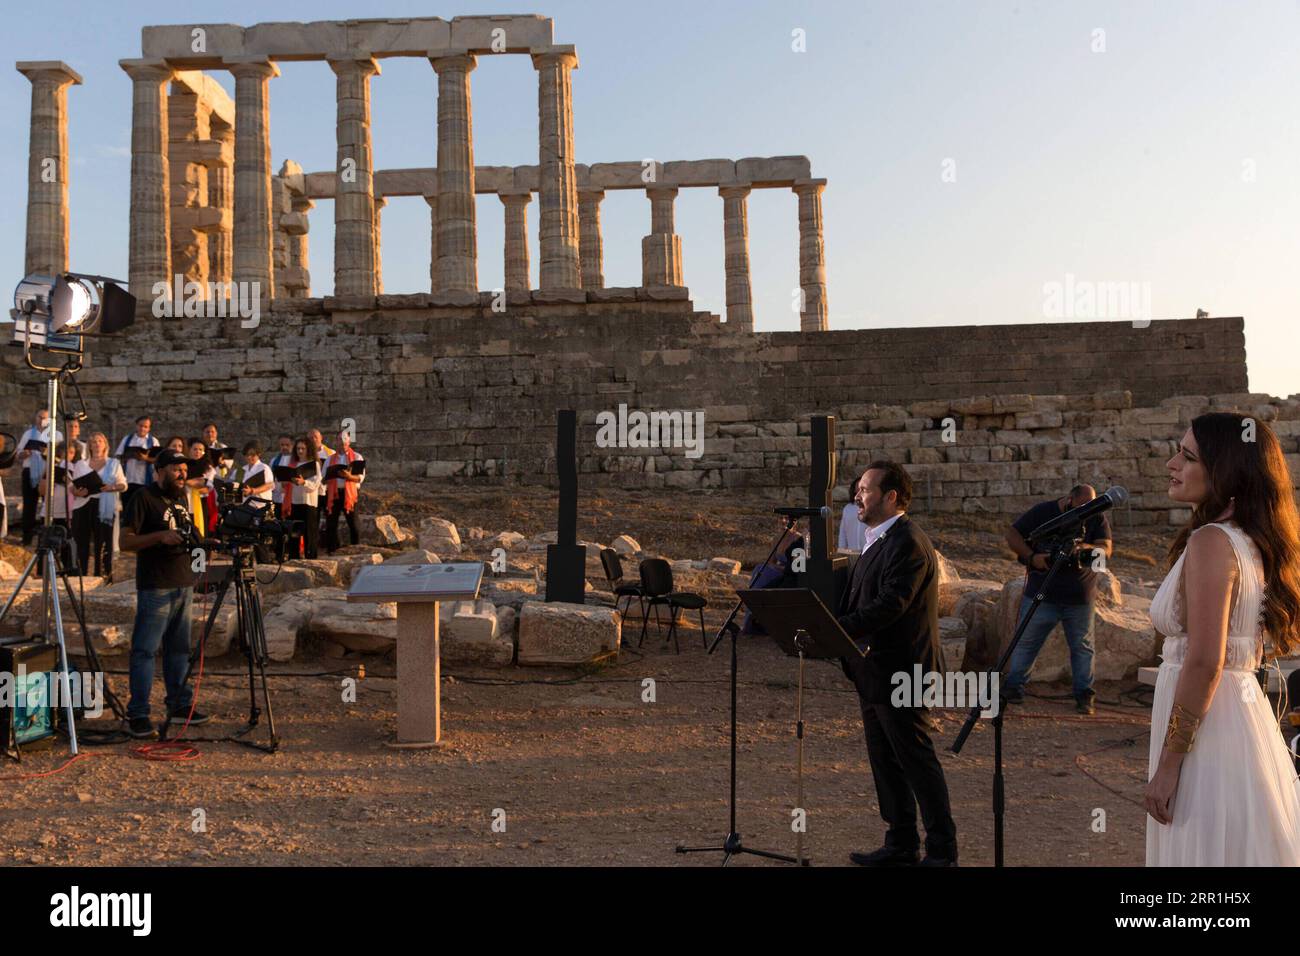 200917 -- ATHENS, Sept. 17, 2020 -- Singers perform a musical in front of the ruins of the Temple of Poseidon at cape Sounion, some 70 km southeast of Athens, Greece, on Sept. 17, 2020. On the occasion of the 70th anniversary of the establishment of the Greek National Tourism Organization GNTO and the 71st anniversary of the founding of the People s Republic of China and the Mid-Autumn festival, a musical entitled As long as there shall be Achaeans -- Variations on a Sunbeam was staged on Thursday in front of the ruins of the emblematic 2,500-year-old Temple of Poseidon, the god of the sea in Stock Photo